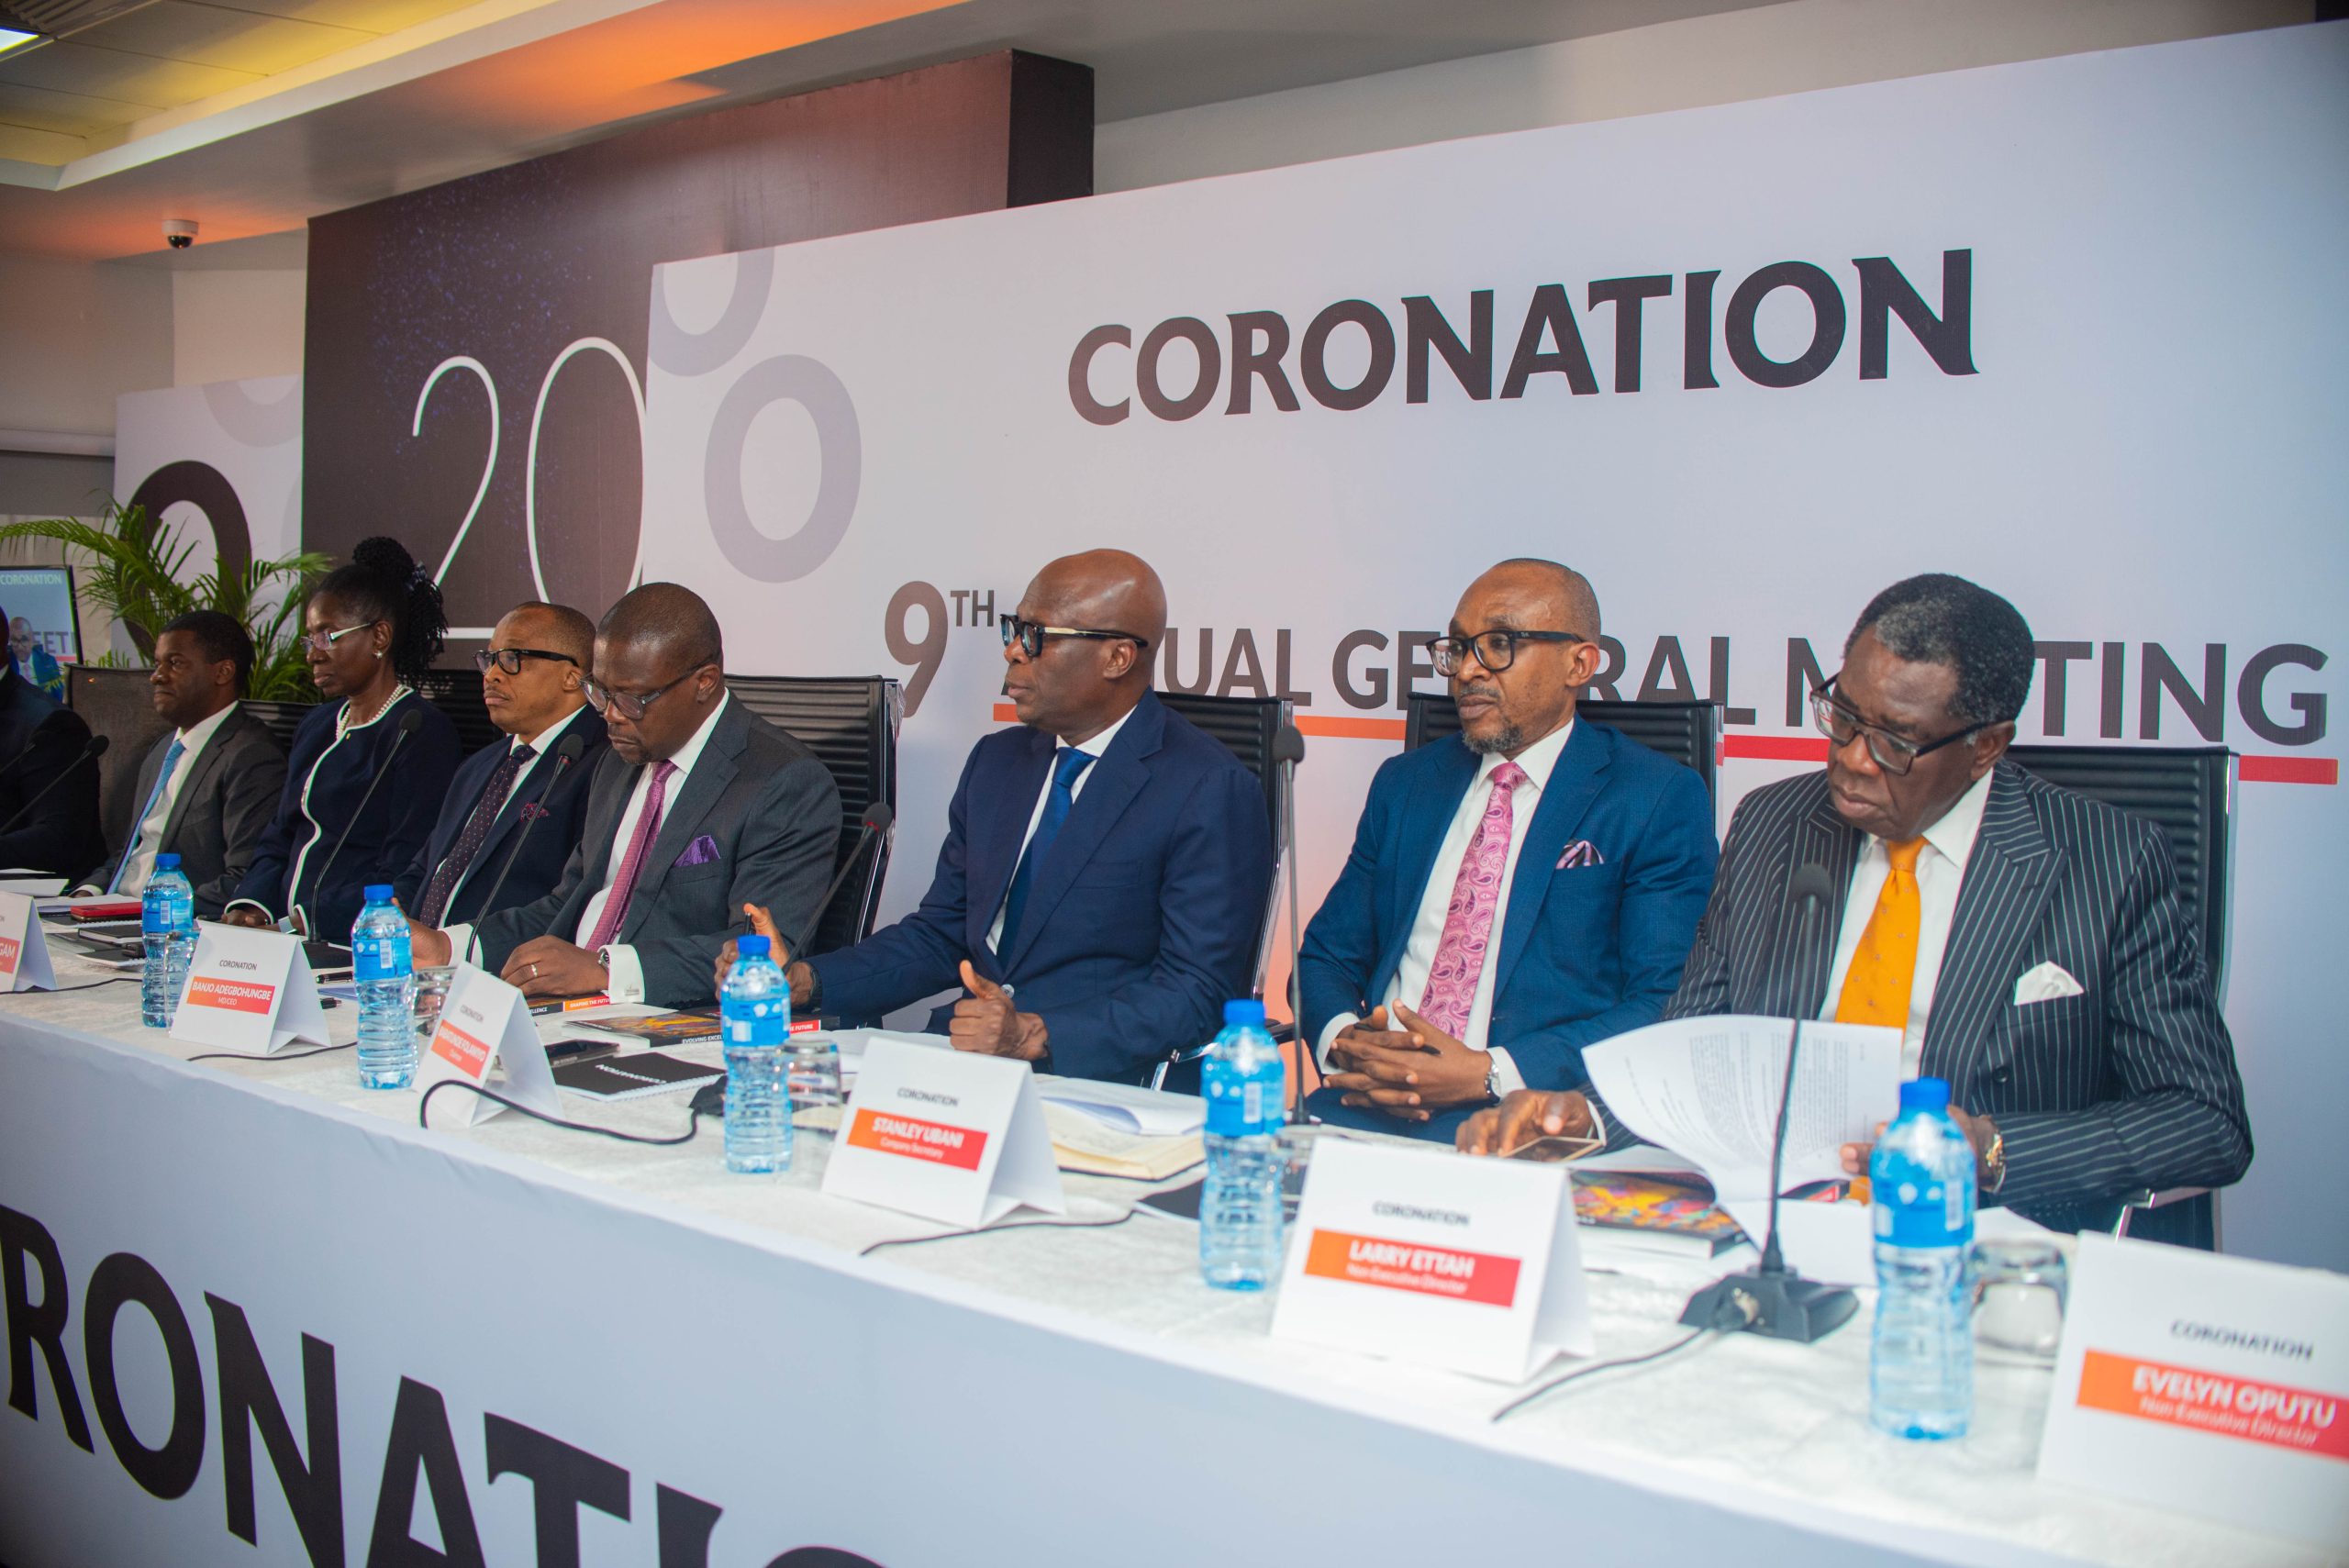 Coronation Merchant Bank Records 62% Growth in Gross Earnings, Holds 9th General Meeting